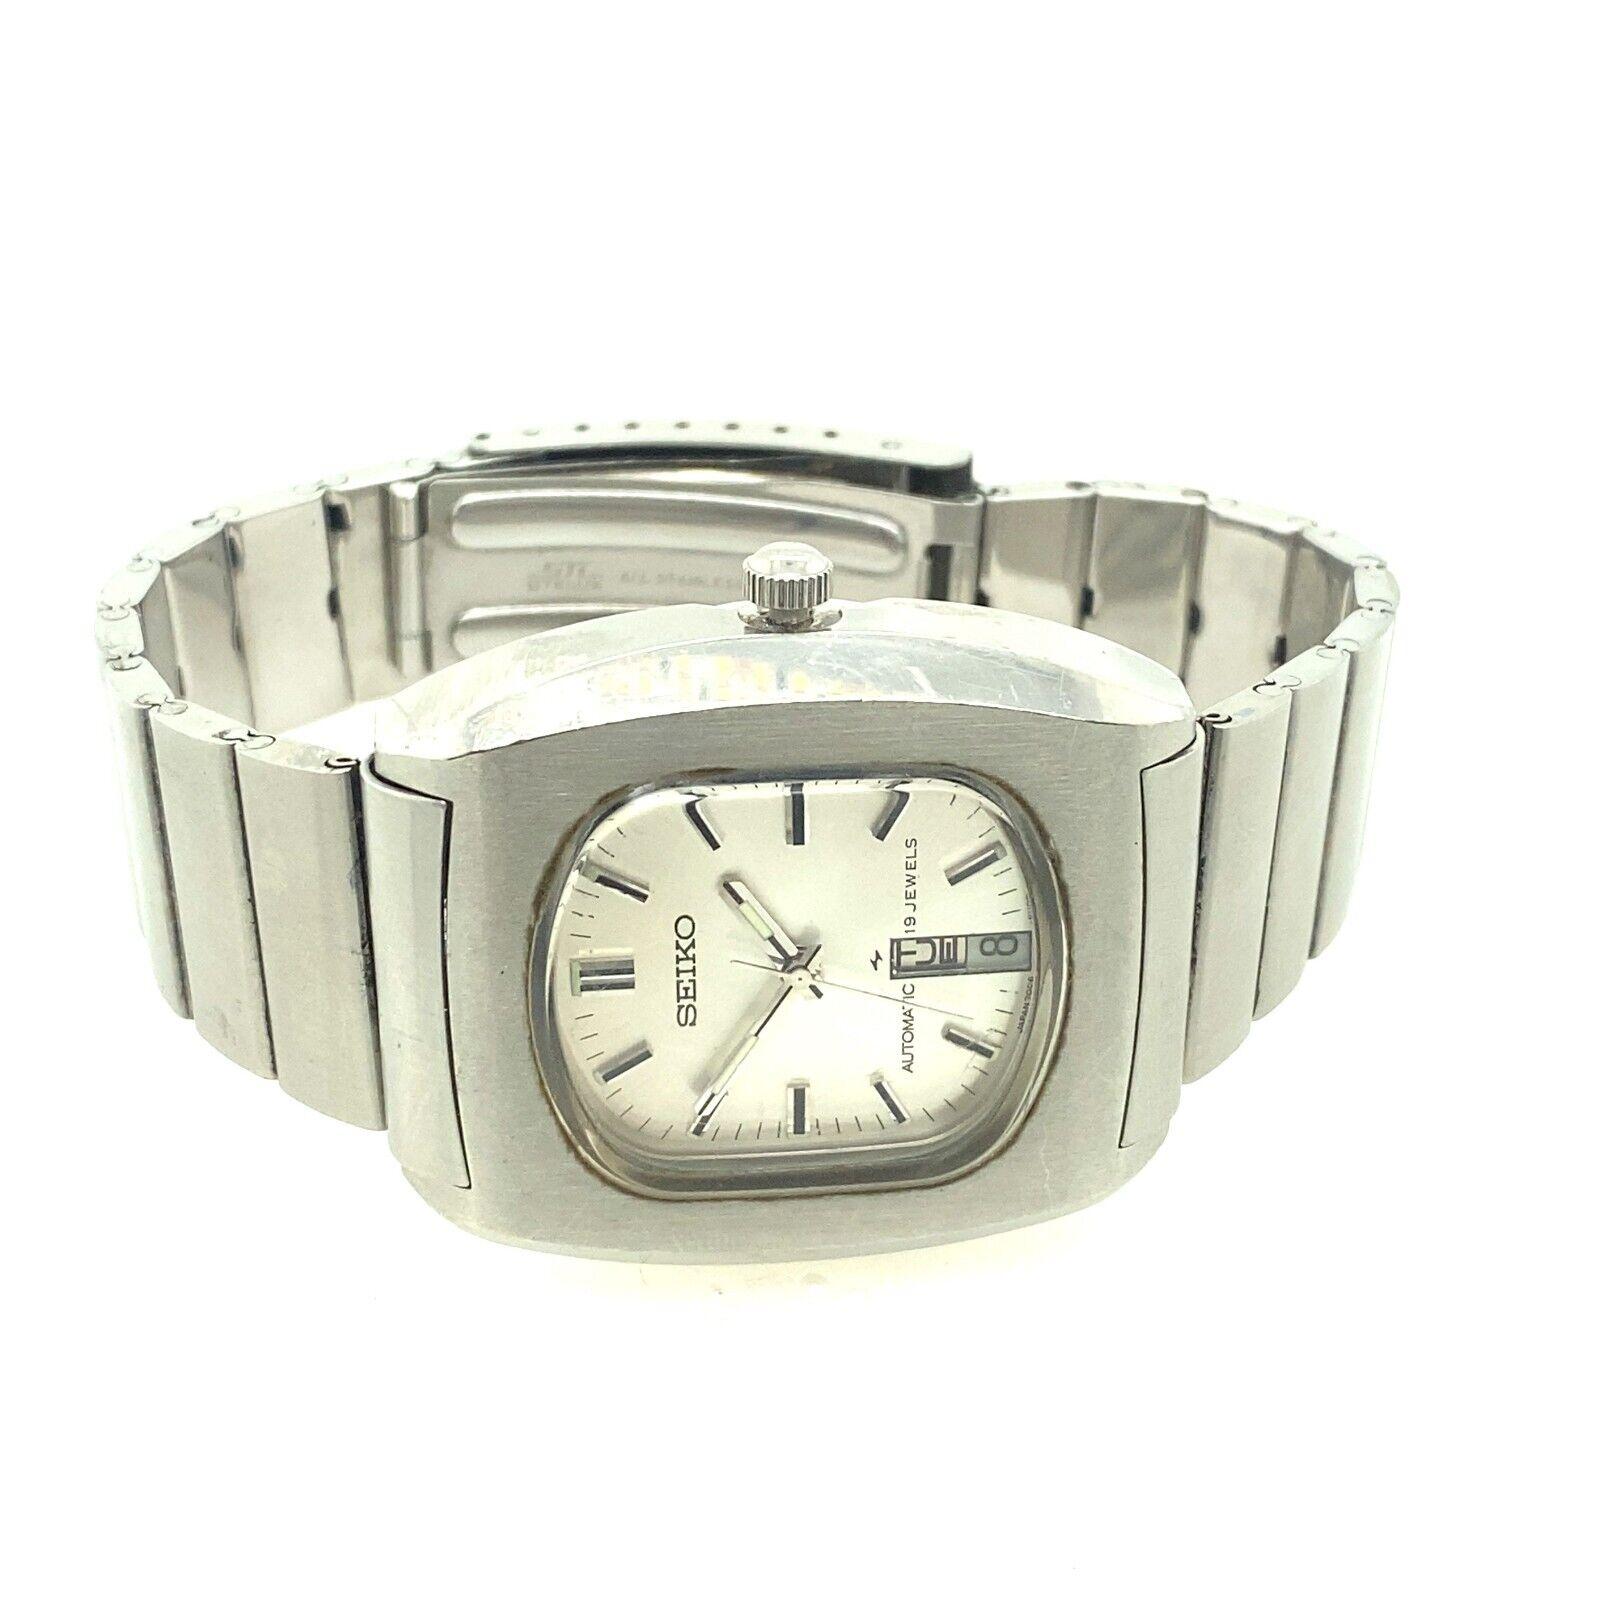 This Seiko Automatic Stainless Steel Gets Watch is a classic, elegant timepiece with a rectangle stainless steel case and a matching stainless-steel bracelet. The date is displayed in the window.

Additional Information:
Case Size: 40mm x